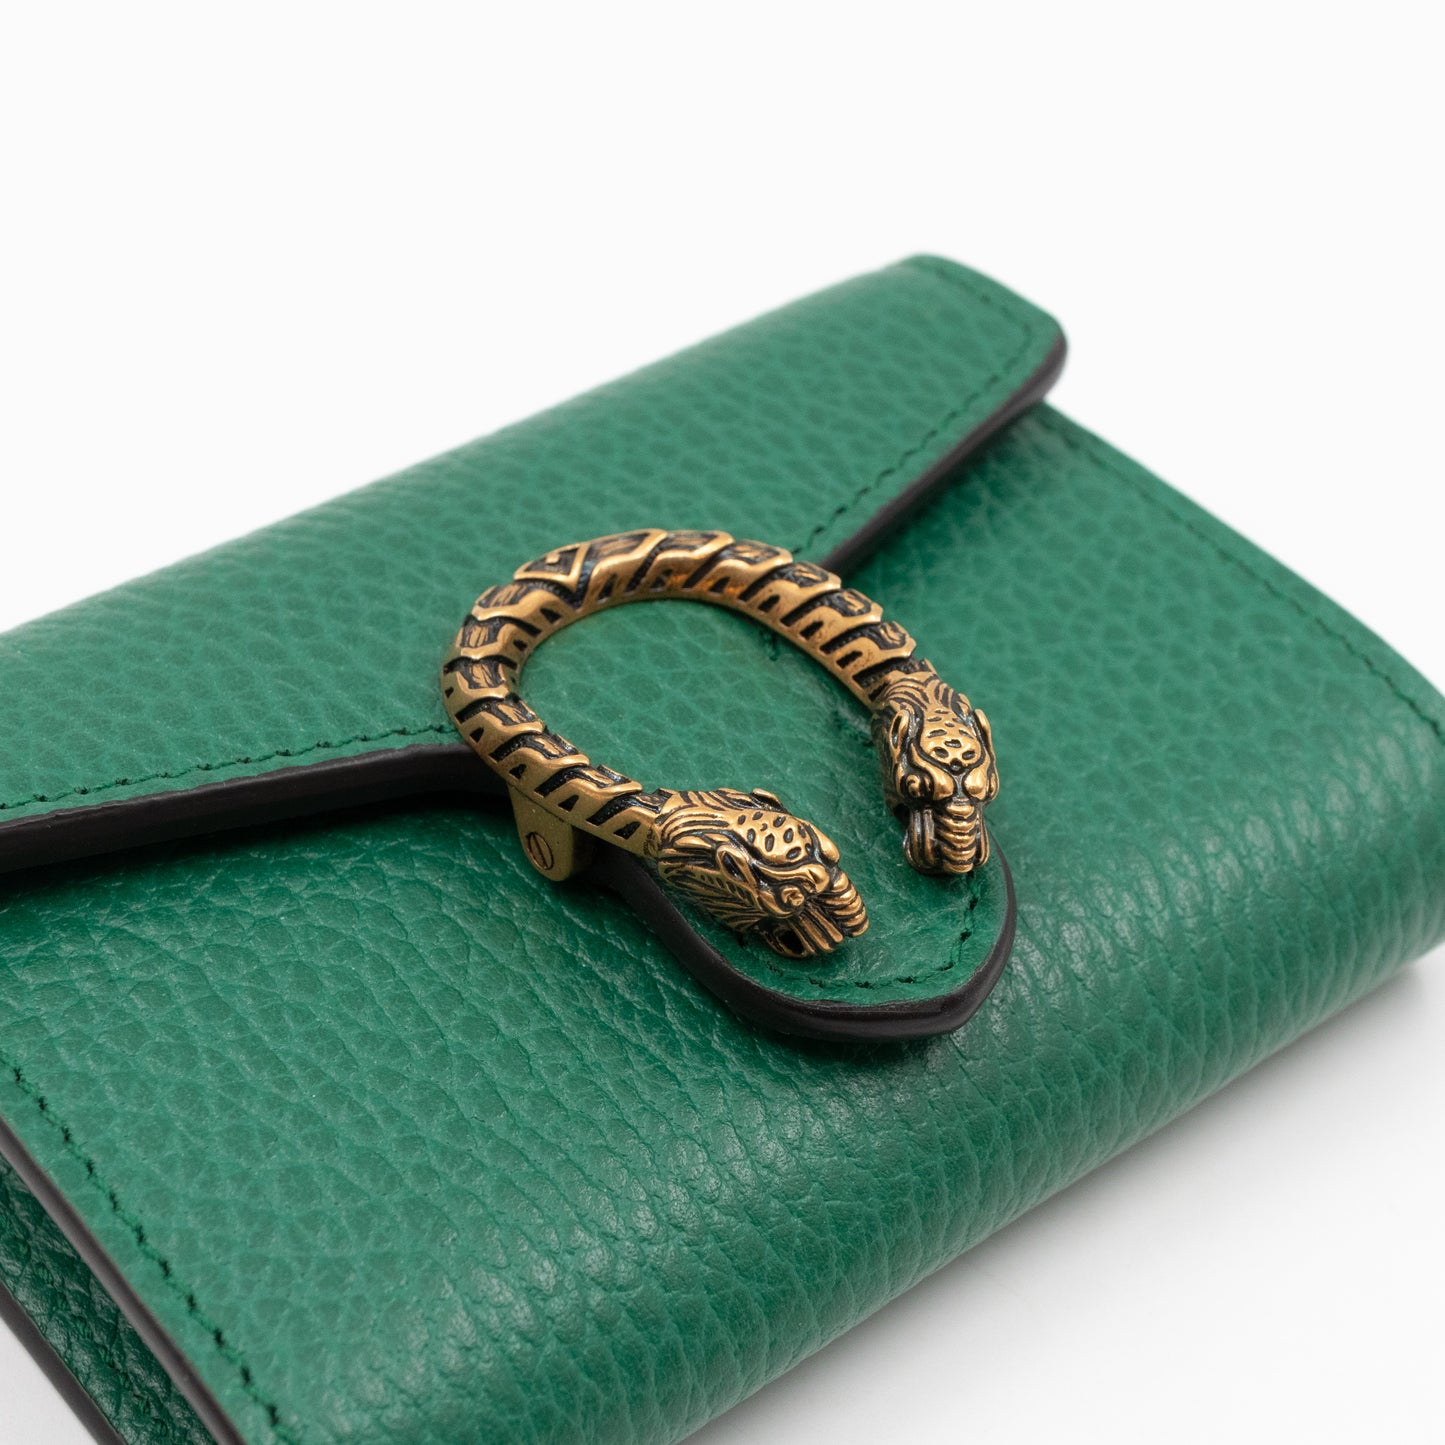 Dionysus Chain Coin Purse Green Leather